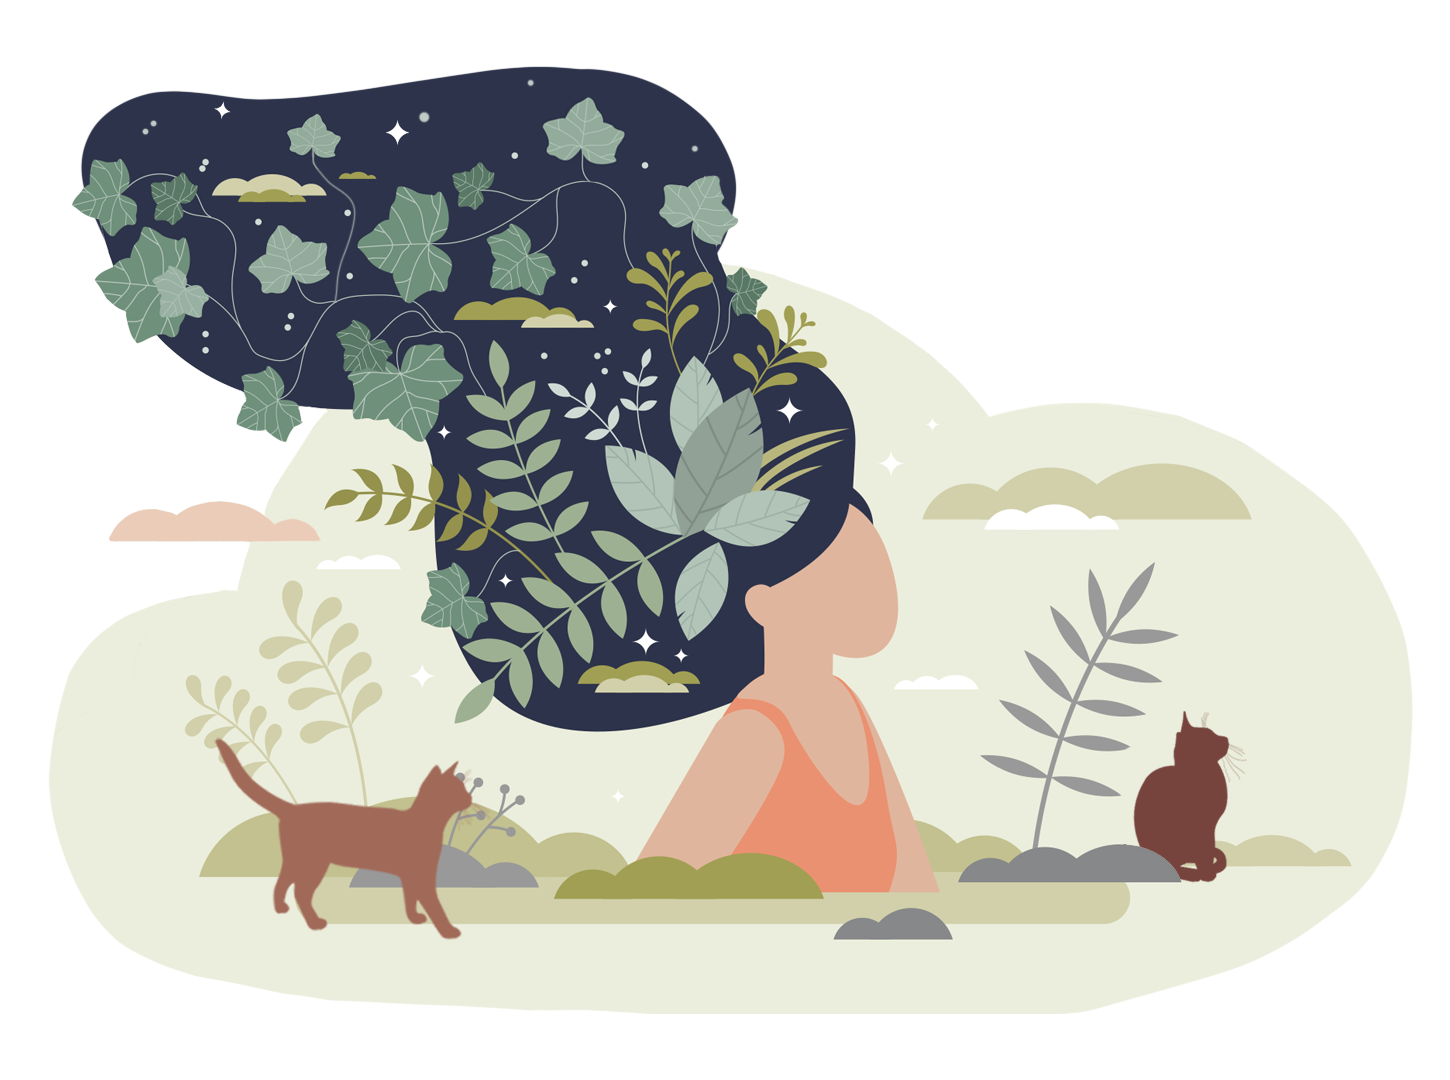 A digitally drawn image of a woman with wild hair and foliage surrounded by cats